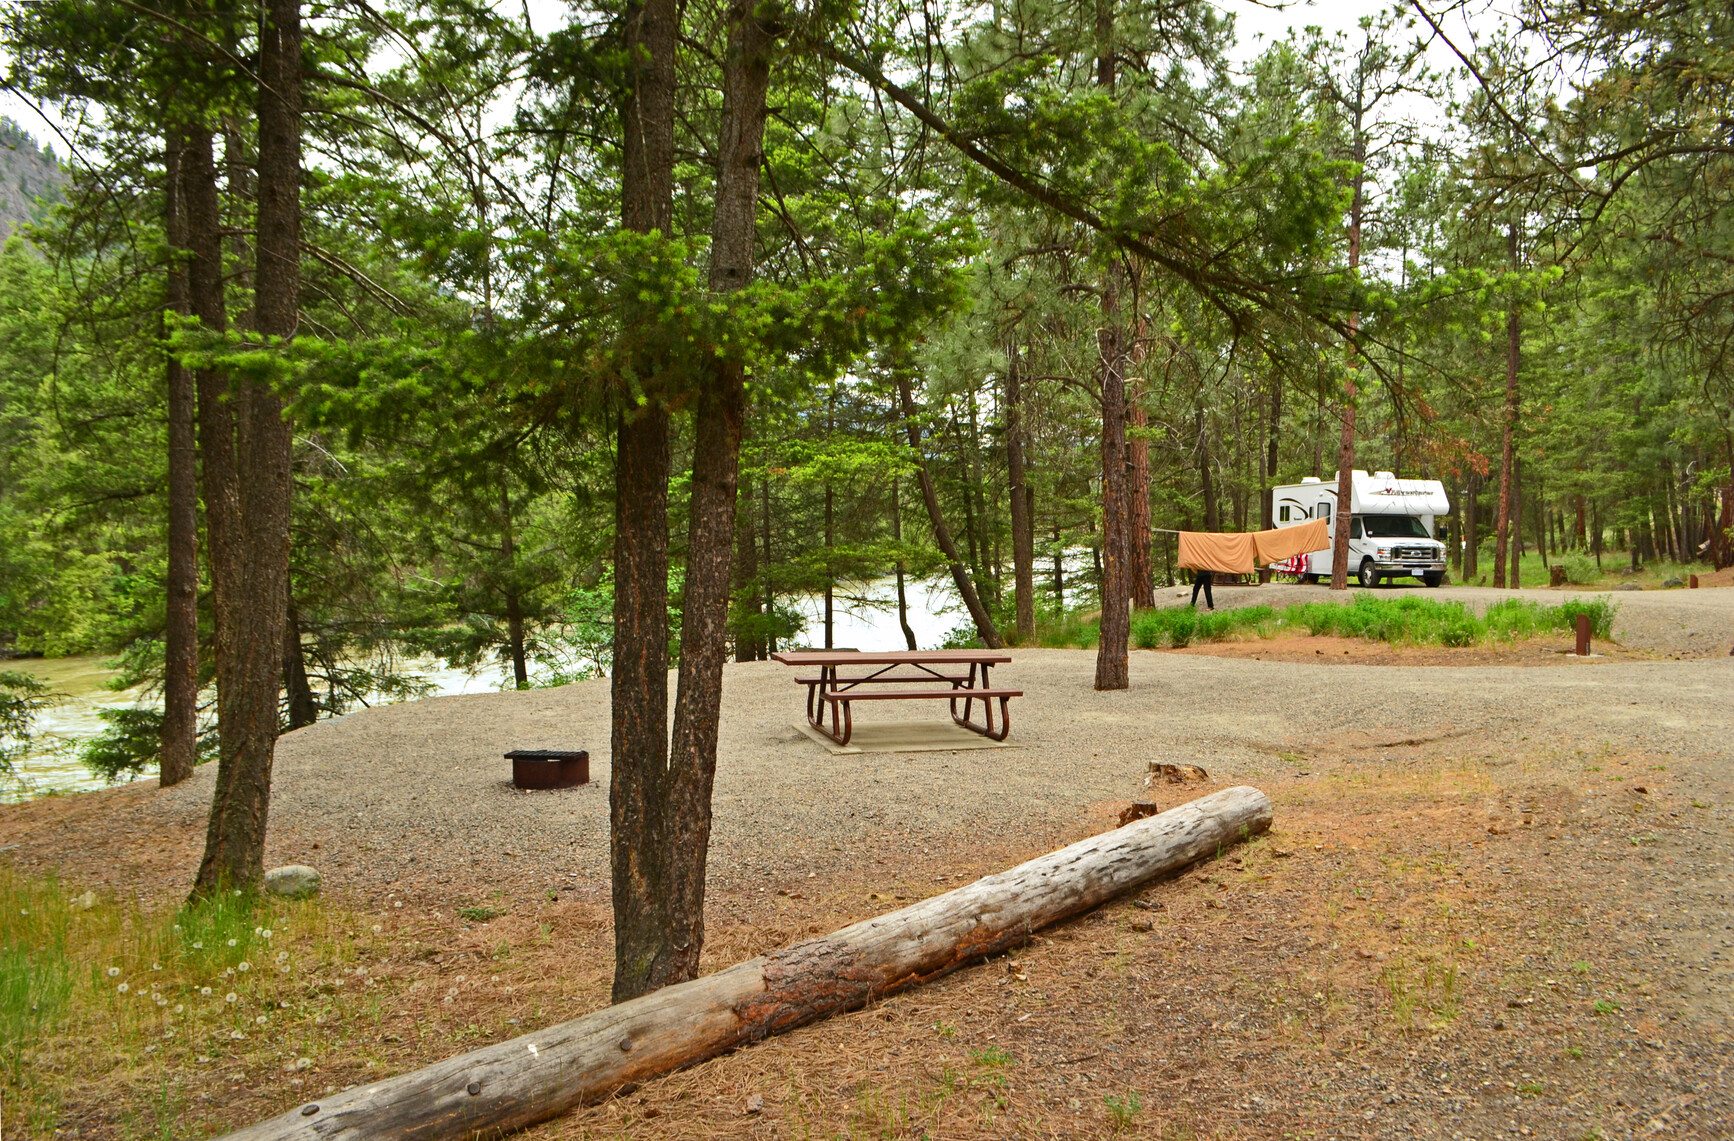 Trees and forest surround 2 campsites. One unoccupied campsite has a fire ring and picnic table. The other occupied campsite has an RV, and a park visitor hanging blankets to a clothesline. Similkameen River is in the background.